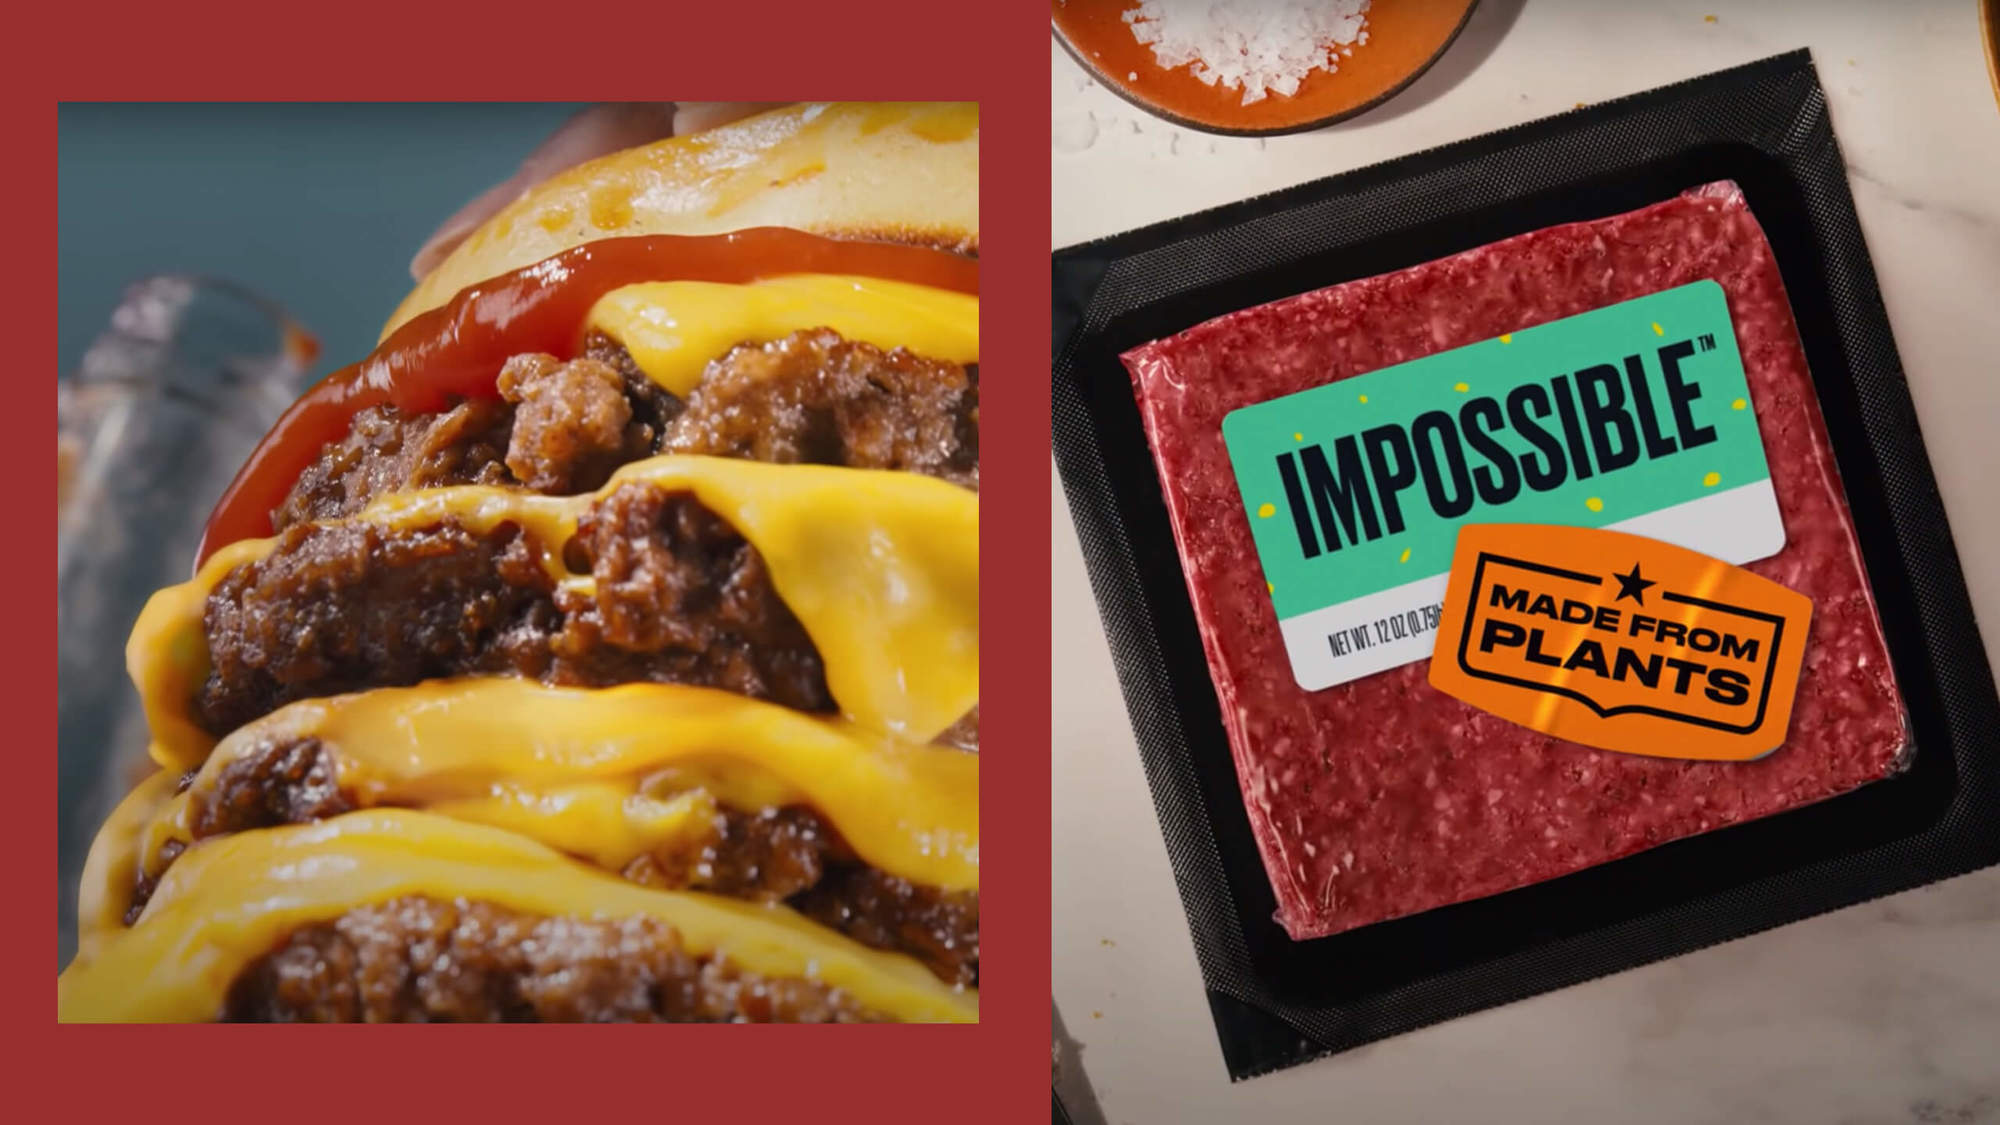 A stack of Impossible Burgers with cheese and ketchup side by side a package of Impossible Food made from plants. April 2021